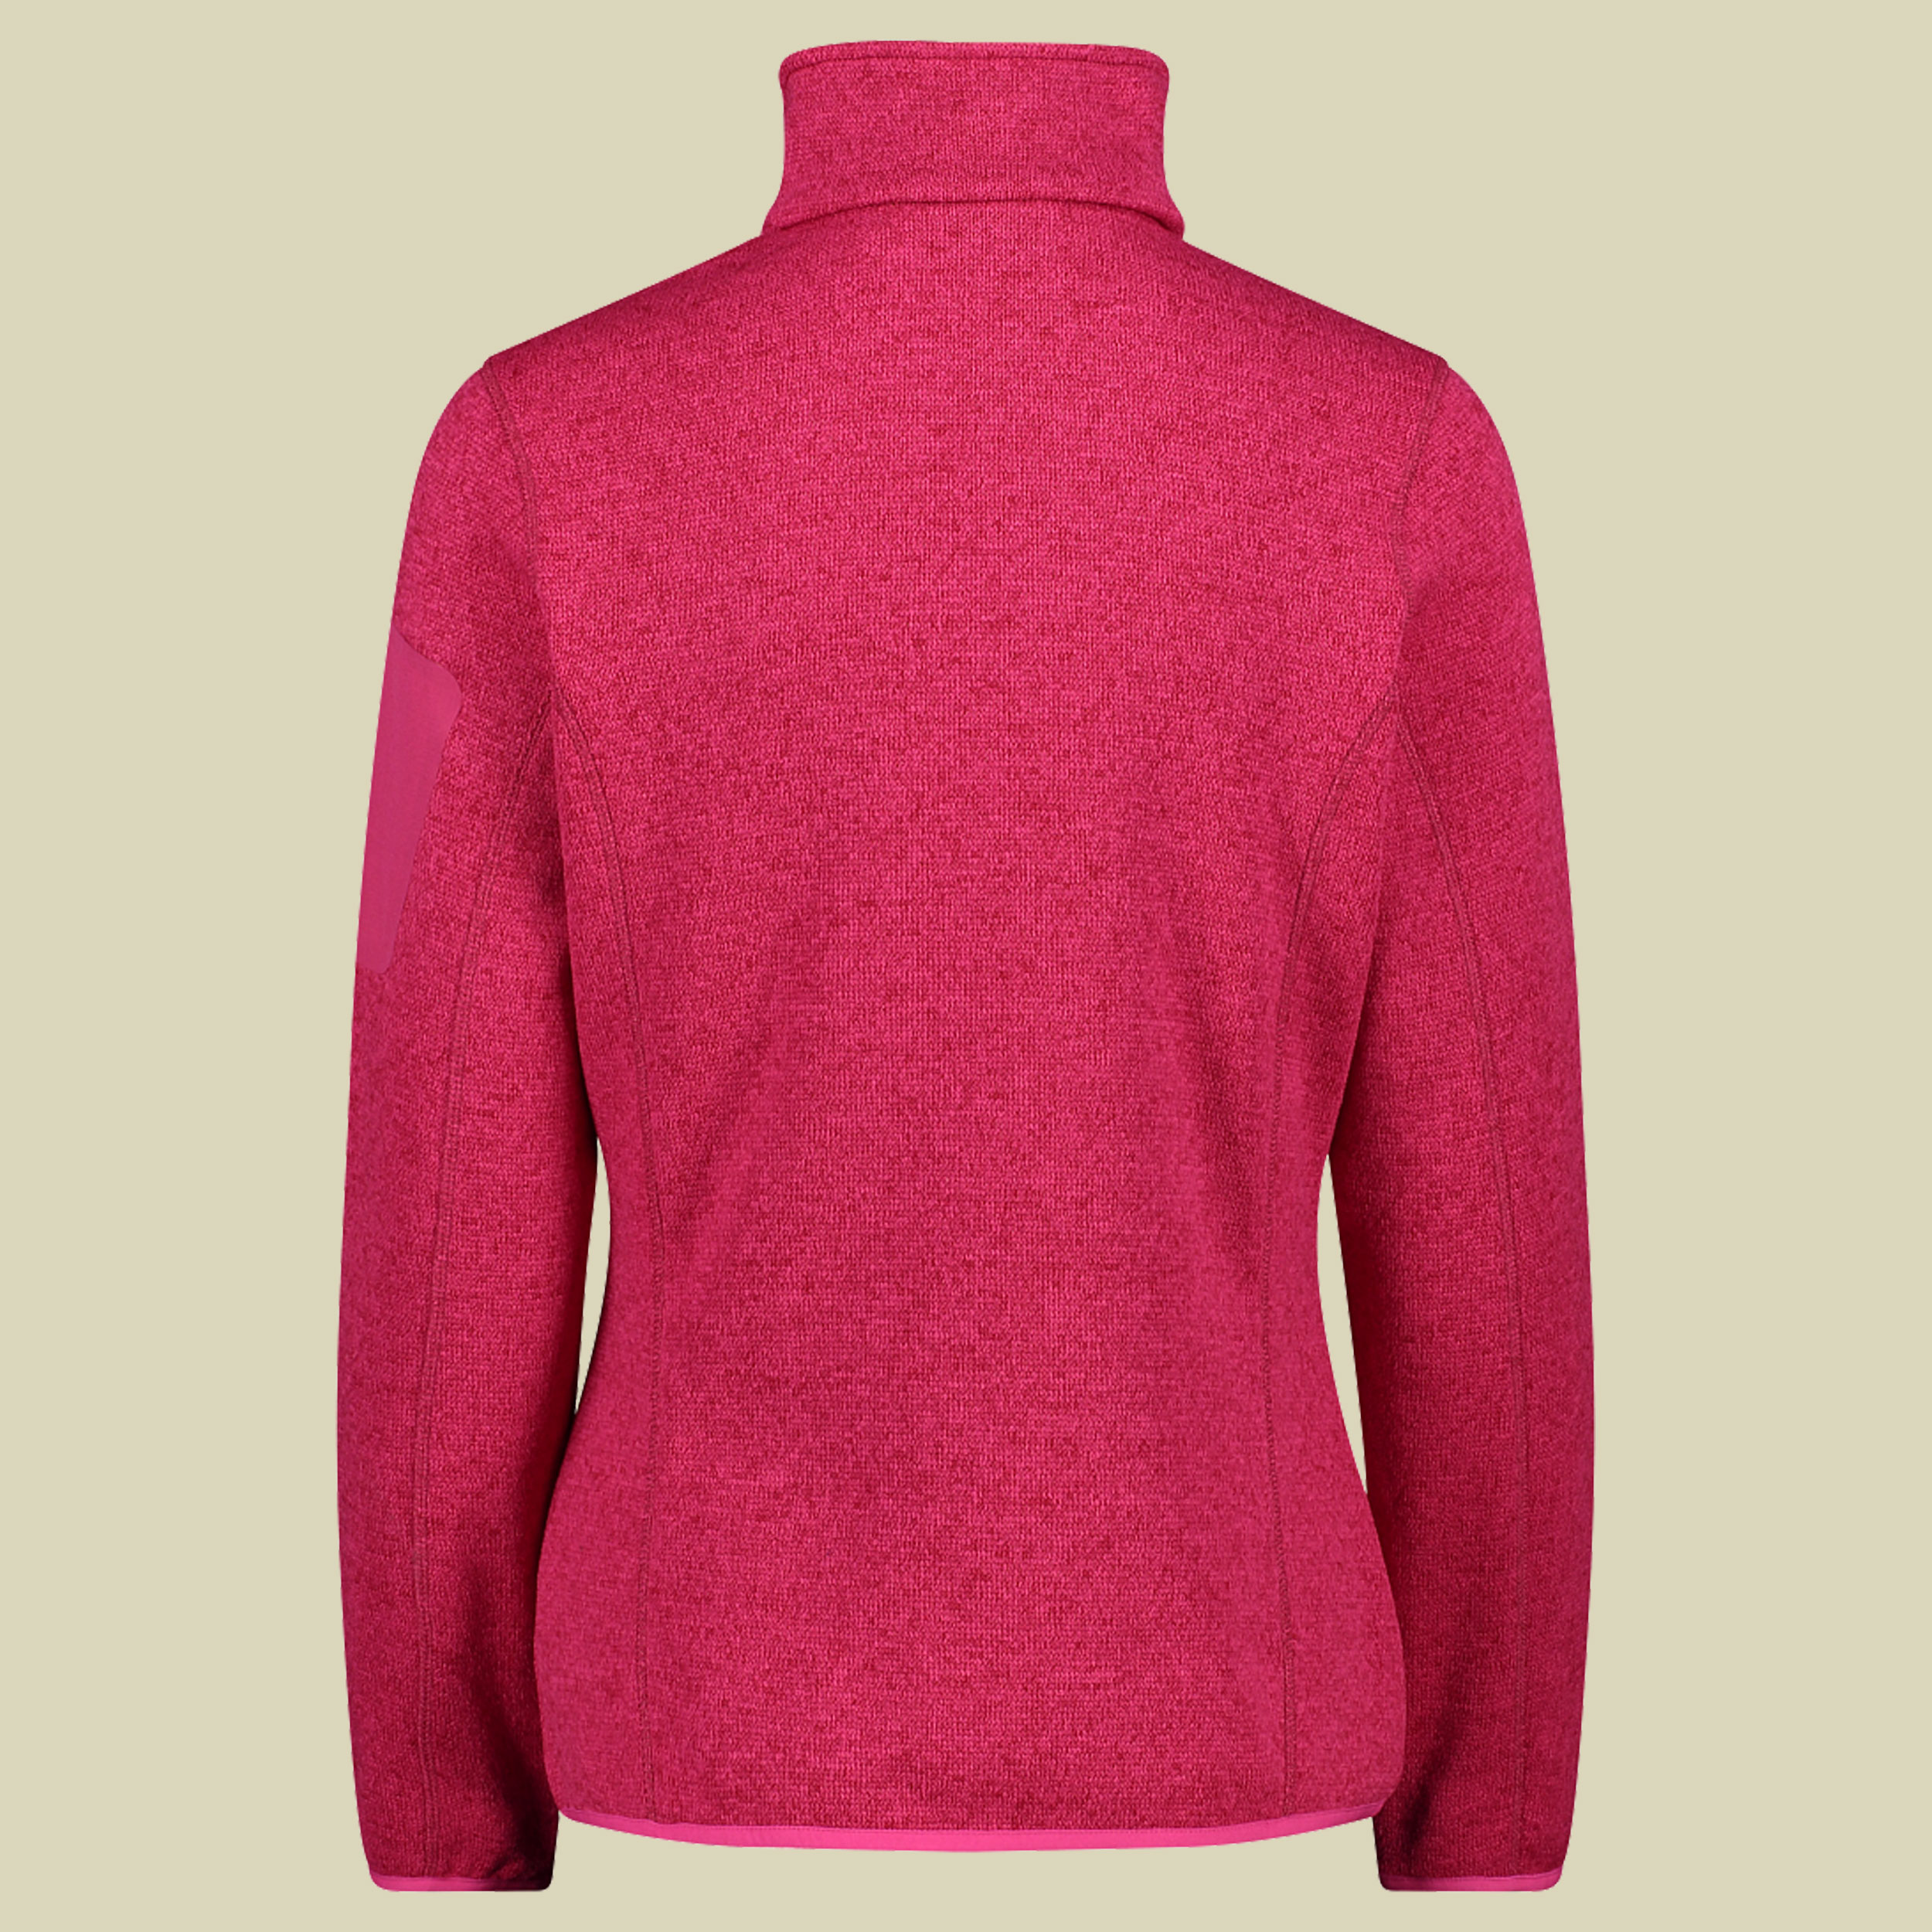 Woman Knitted Fleece Jacket CMP 3H14746 Größe 40 Farbe 03HP fuxia-antracite